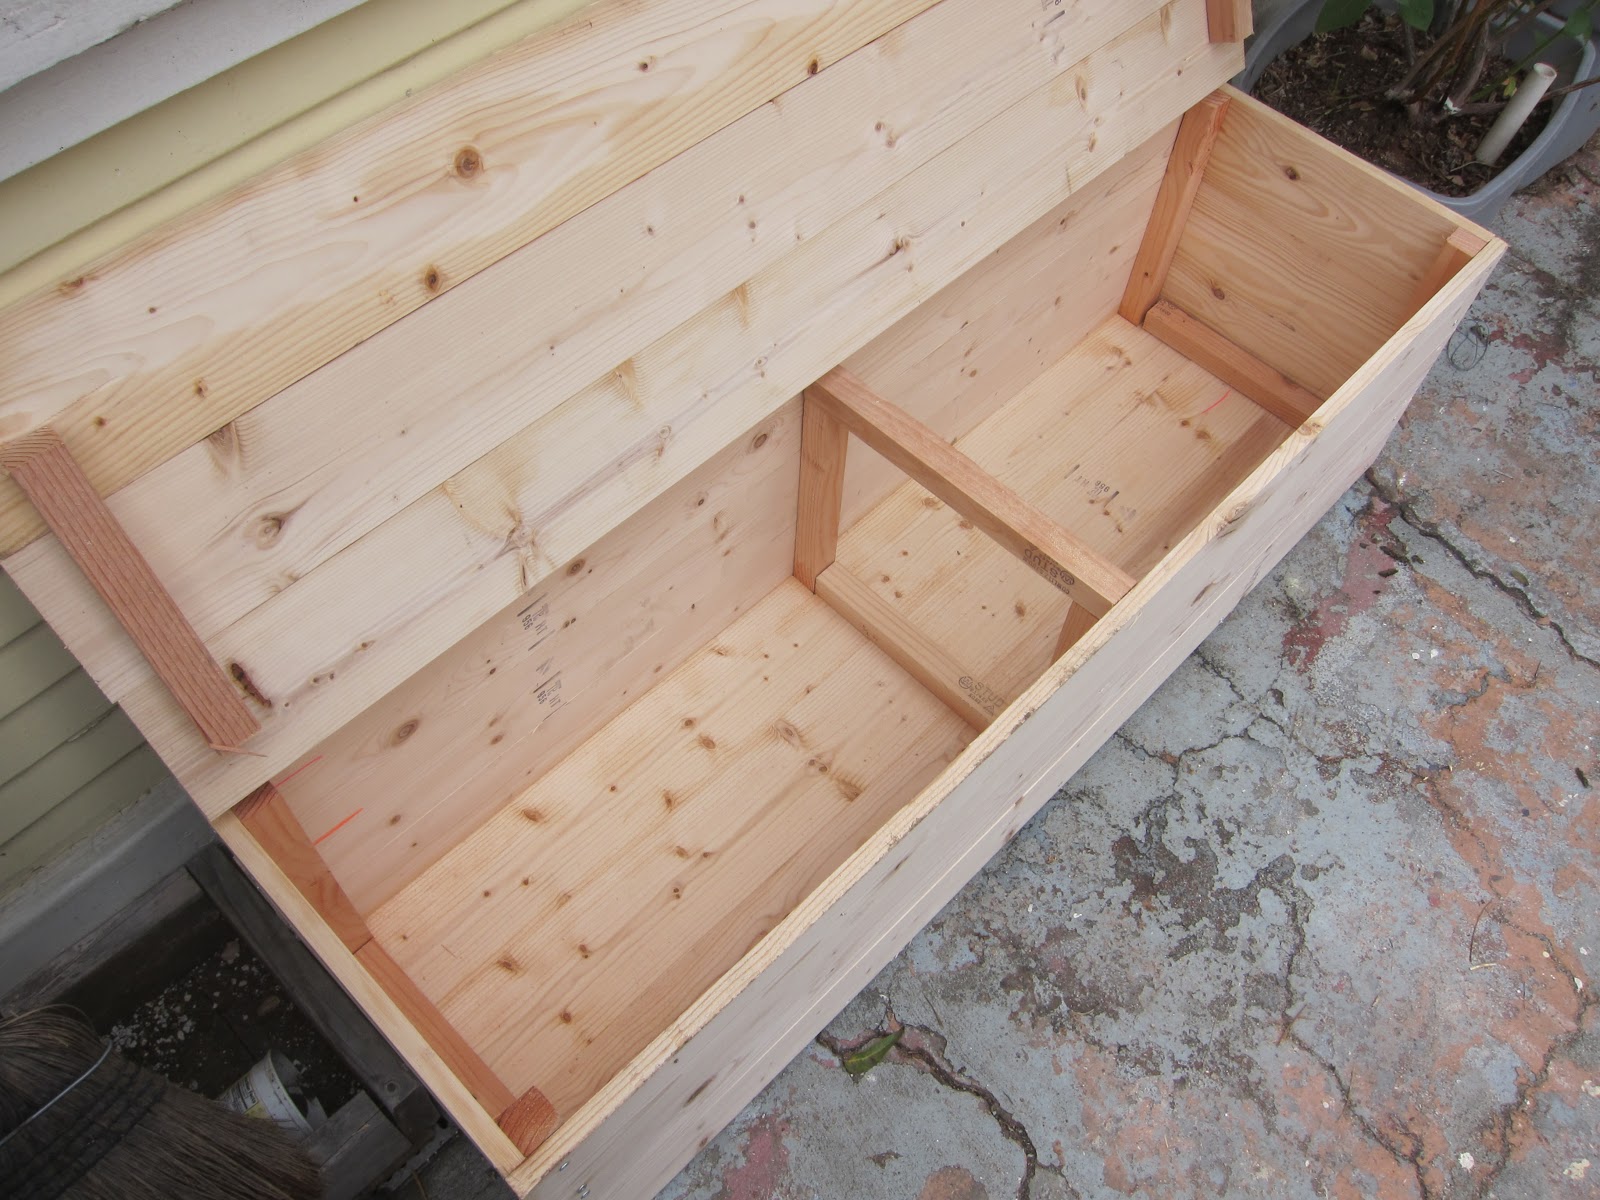 Woodworking Plans Can Crusher: Wood Worm Bin Plans Wooden 